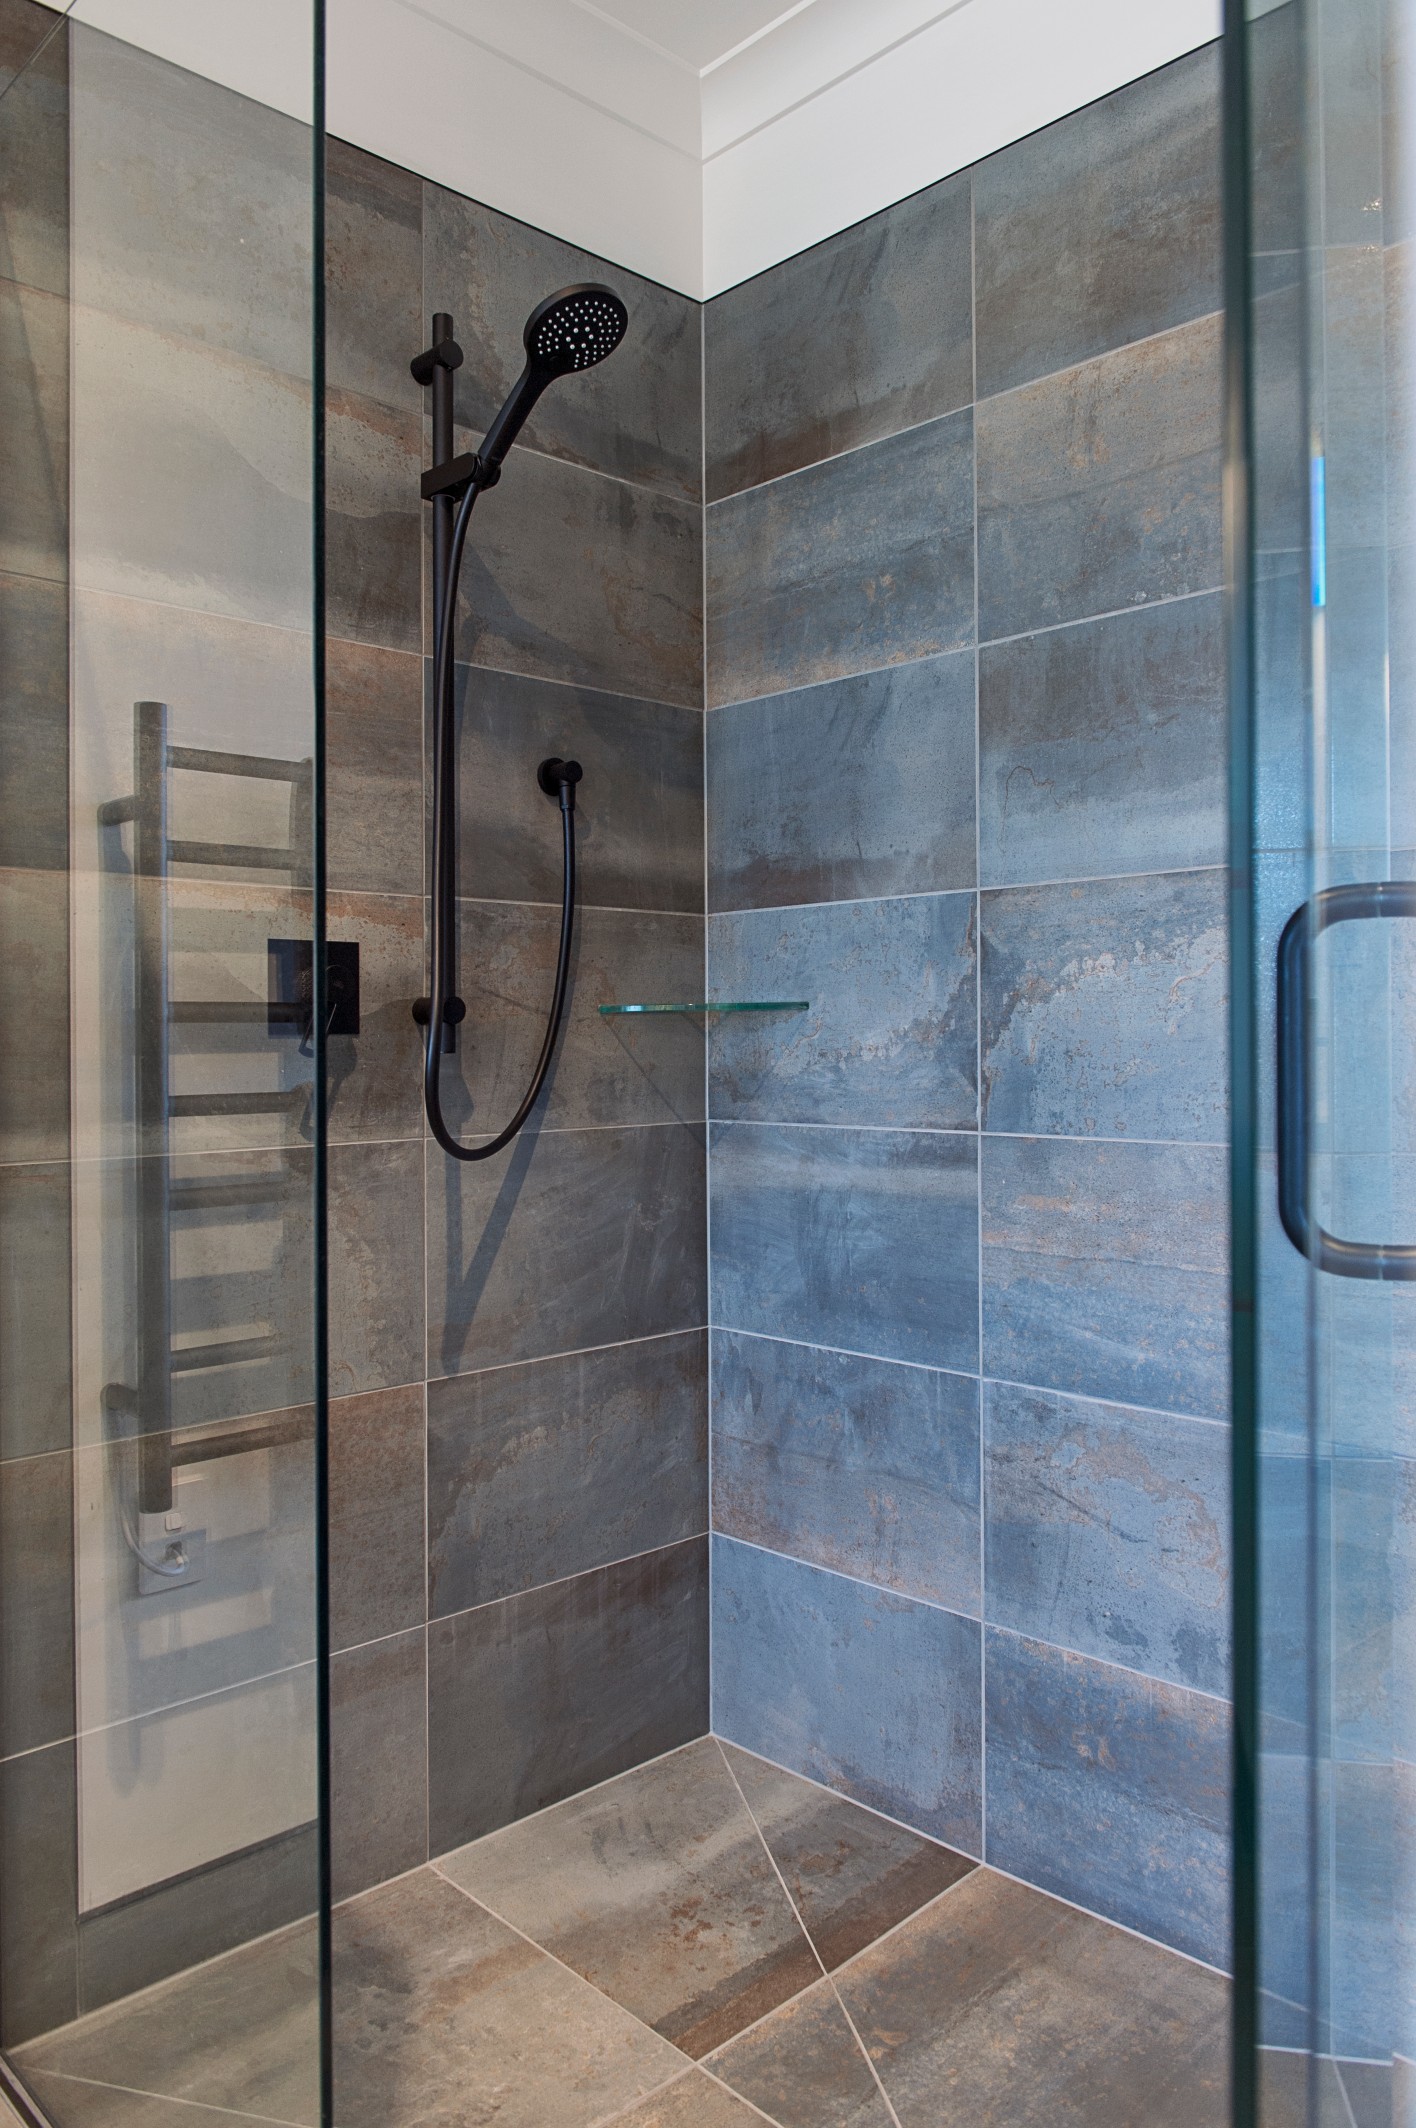  This fully tiled shower makes cleaning a breeze